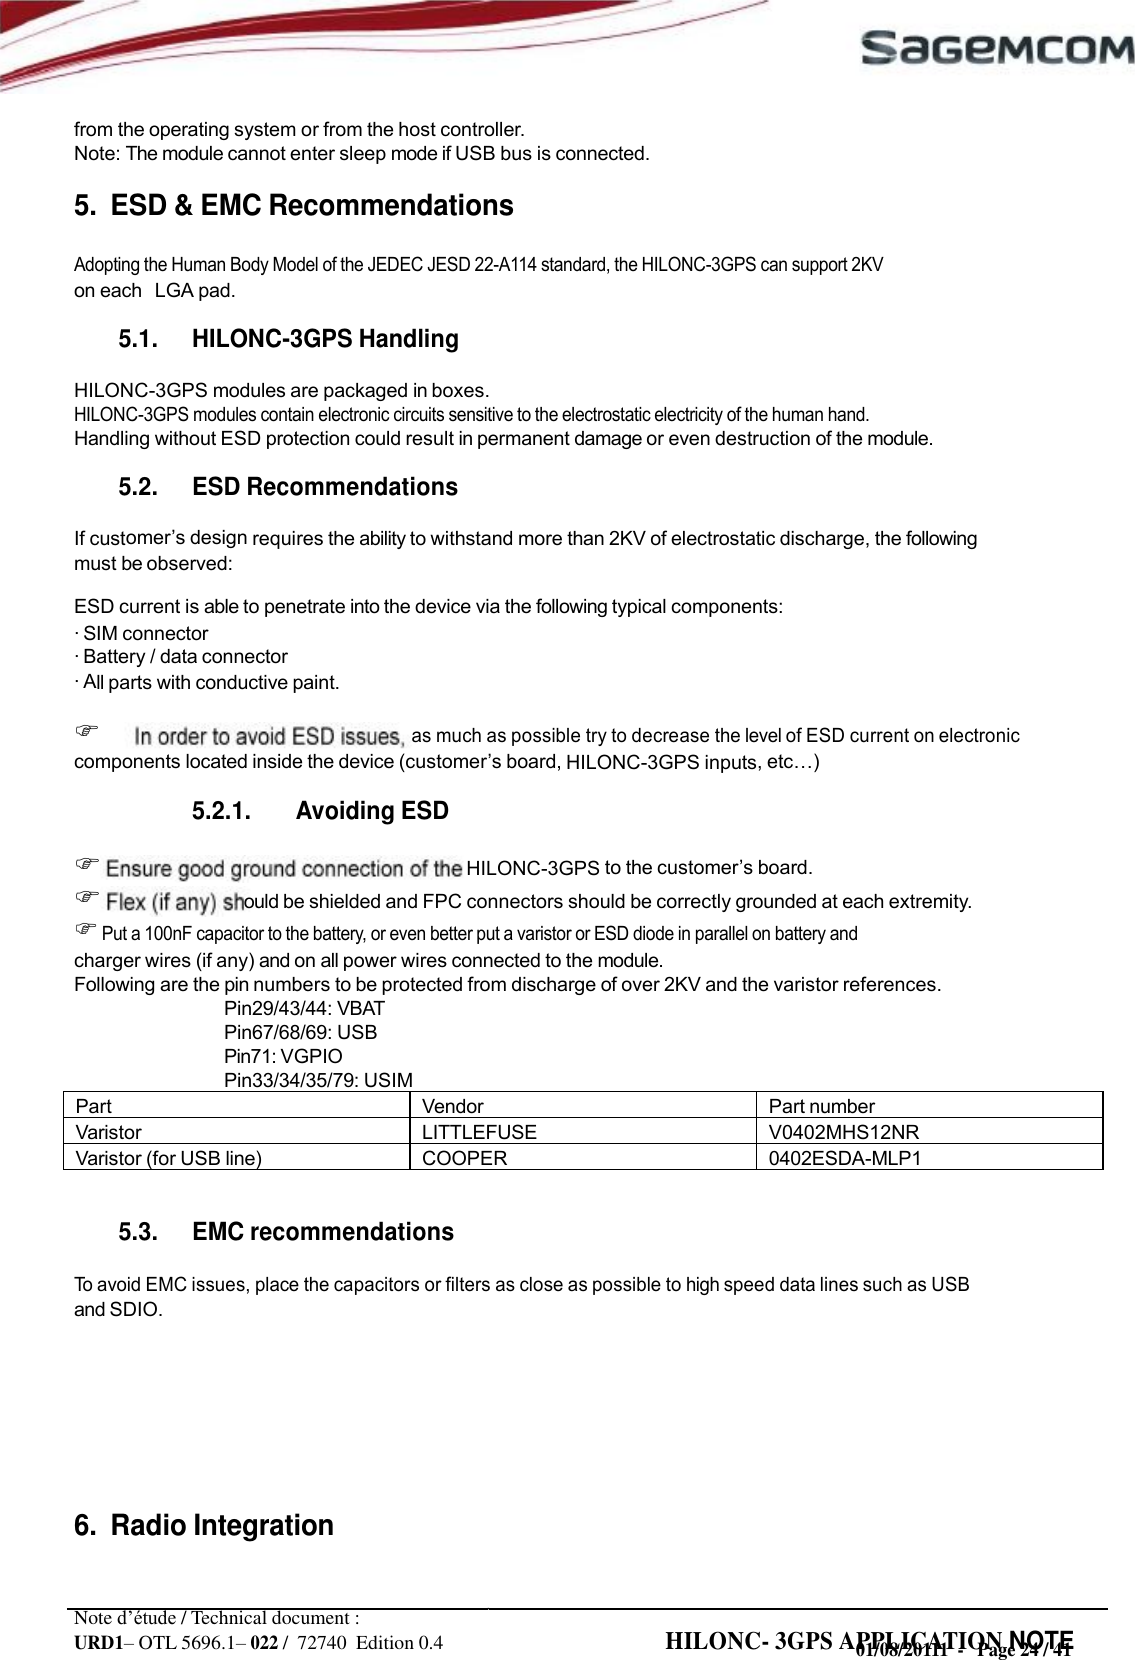 URD1– OTL 5696.1– 022 /  72740  Edition 0.4 HILONC- 3GPS APPLICATION NOTE      from the operating system or from the host controller. Note: The module cannot enter sleep mode if USB bus is connected.  5.  ESD &amp; EMC Recommendations  Adopting the Human Body Model of the JEDEC JESD 22-A114 standard, the HILONC-3GPS can support 2KV on each   LGA pad.  5.1. HILONC-3GPS Handling  HILONC-3GPS modules are packaged in boxes. HILONC-3GPS modules contain electronic circuits sensitive to the electrostatic electricity of the human hand. Handling without ESD protection could result in permanent damage or even destruction of the module.  5.2. ESD Recommendations  If cust design requires the ability to withstand more than 2KV of electrostatic discharge, the following must be observed: ESD current is able to penetrate into the device via the following typical components: · SIM connector · Battery / data connector · All parts with conductive paint.   as much as possible try to decrease the level of ESD current on electronic components located inside the device  board, HILONC-3GPS inputs,   5.2.1. Avoiding ESD   HILONC-3GPS to the  board.  ould be shielded and FPC connectors should be correctly grounded at each extremity.  Put a 100nF capacitor to the battery, or even better put a varistor or ESD diode in parallel on battery and charger wires (if any) and on all power wires connected to the module. Following are the pin numbers to be protected from discharge of over 2KV and the varistor references. Pin29/43/44: VBAT Pin67/68/69: USB Pin71: VGPIO Pin33/34/35/79: USIM      5.3. EMC recommendations  To avoid EMC issues, place the capacitors or filters as close as possible to high speed data lines such as USB and SDIO.        6.  Radio Integration   Note d’étude / Technical document : 01/08/20111  -   Page 24 / 41Part Vendor Part number Varistor LITTLEFUSE V0402MHS12NR Varistor (for USB line) COOPER 0402ESDA-MLP1  